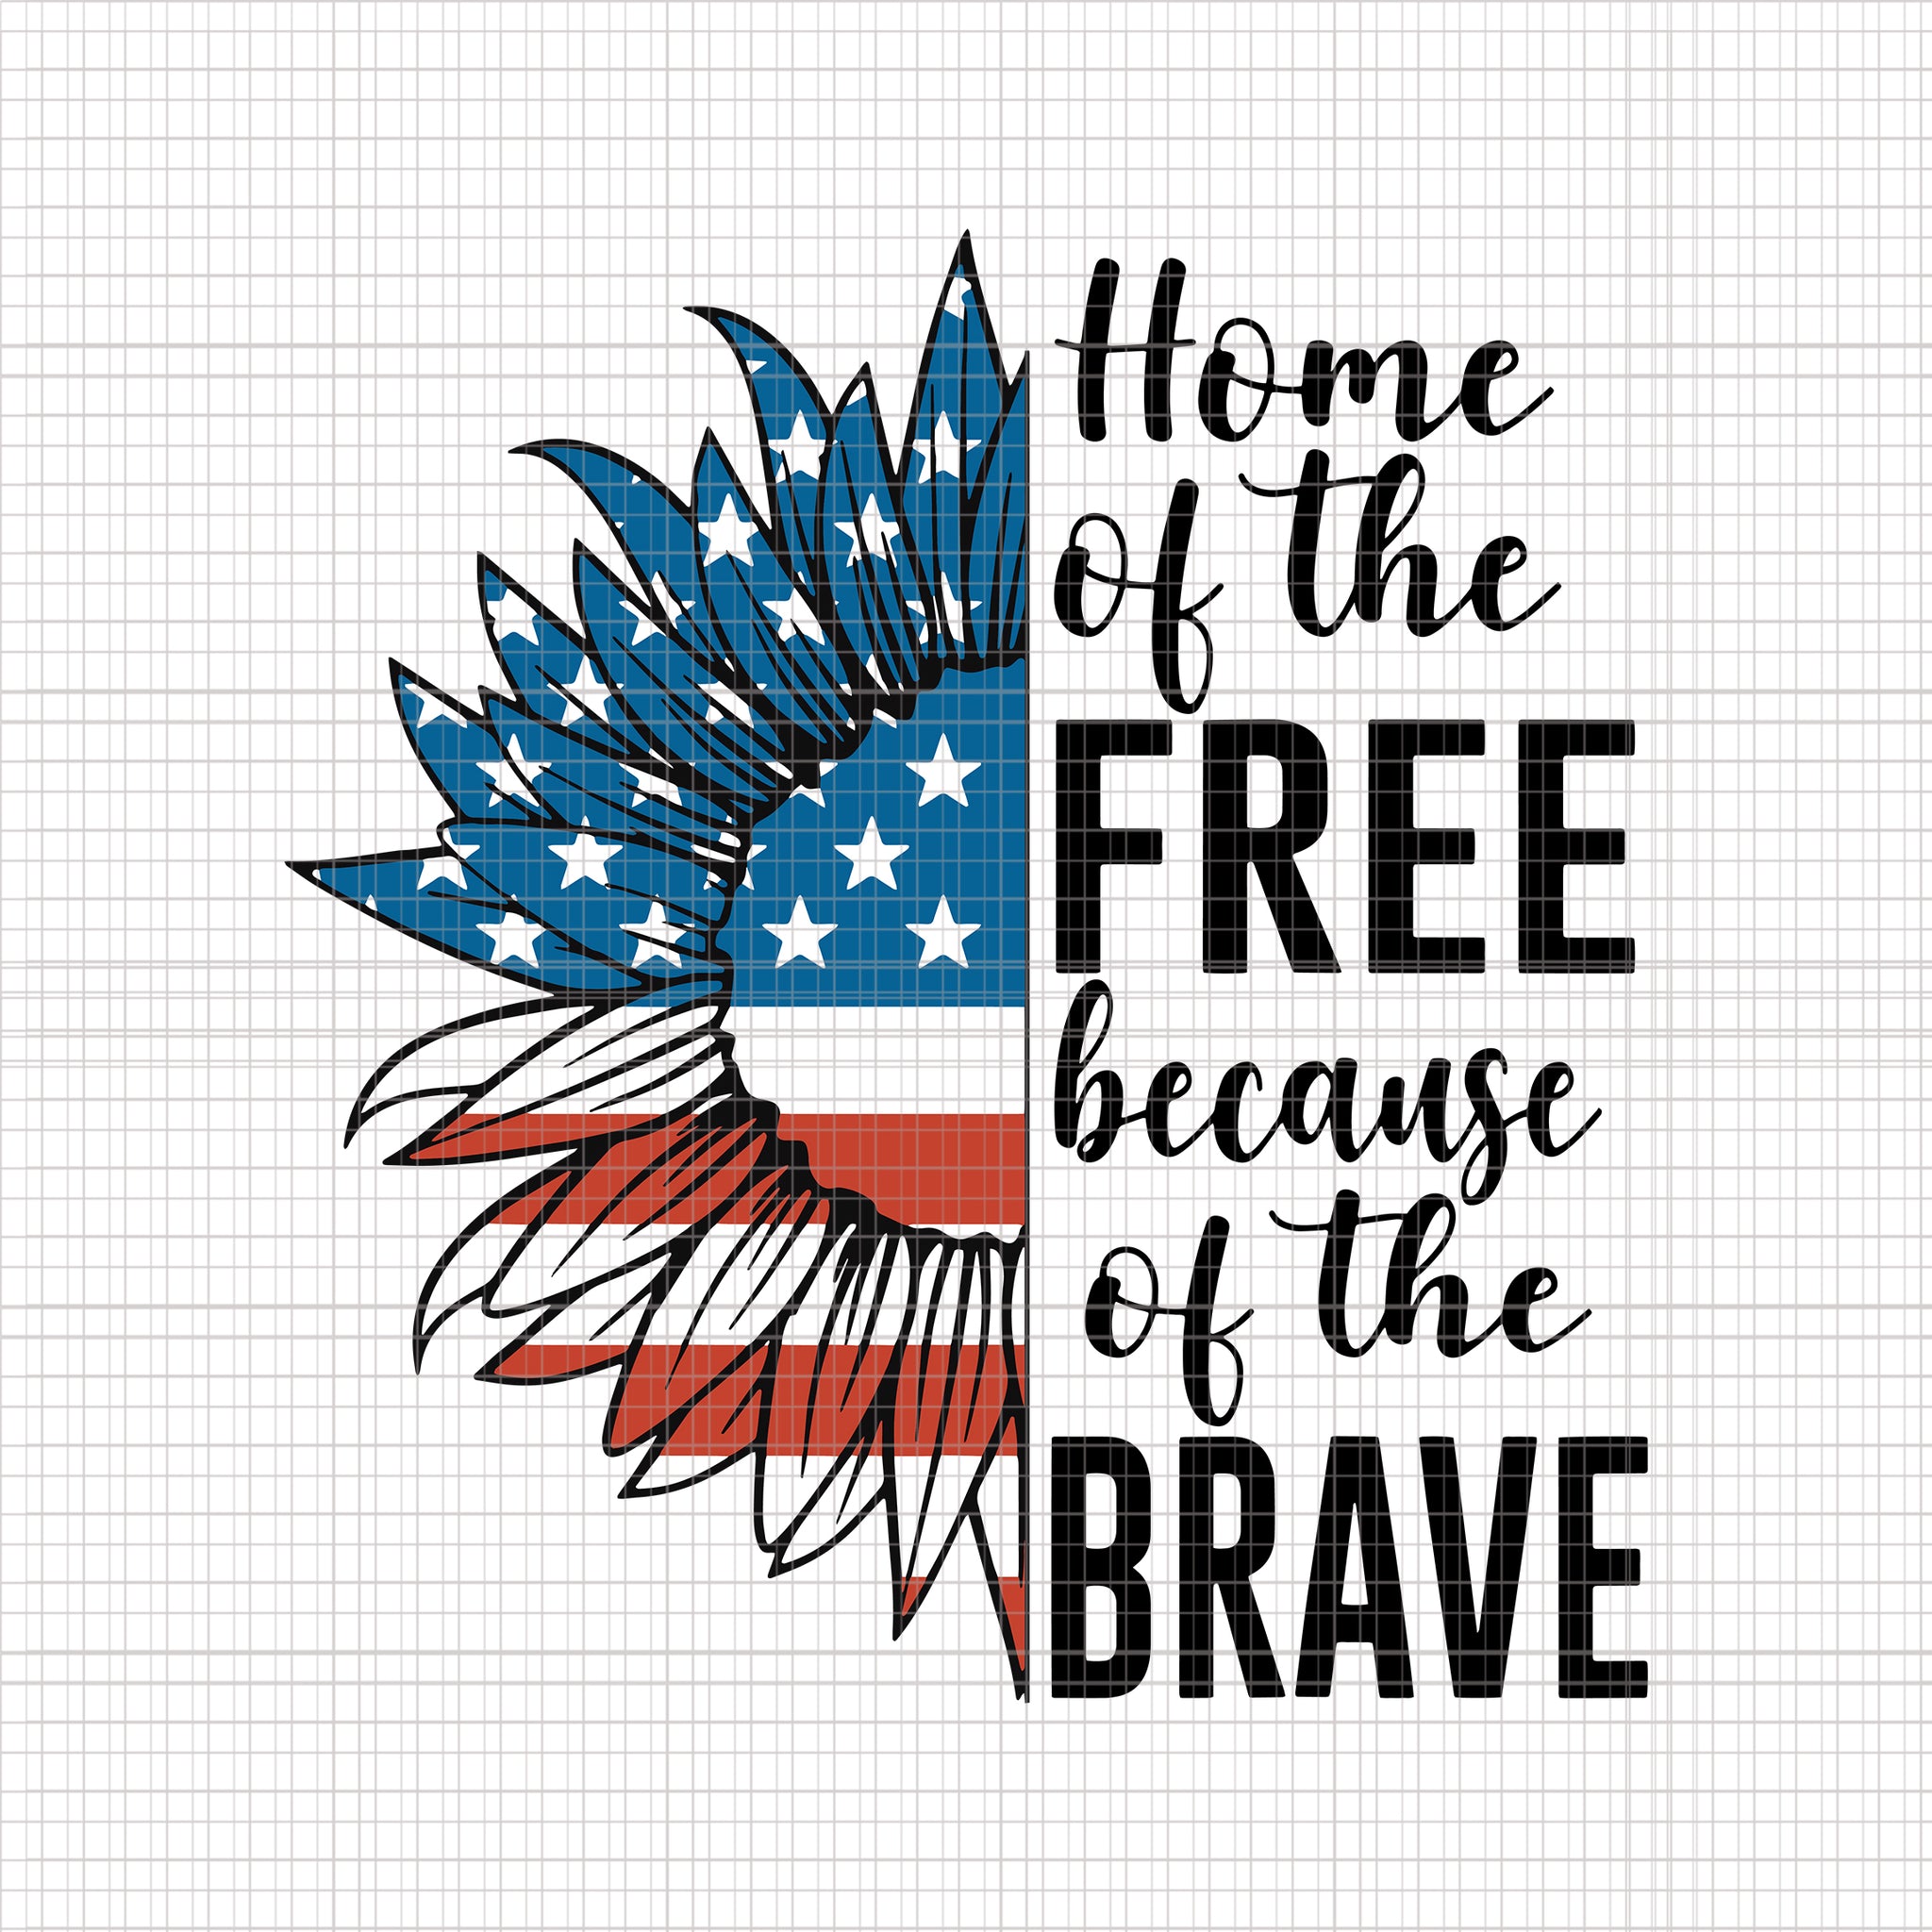 Home Of The Free Because Of The Brave svg, Home Of The Free Because Of The Brave 4th of July, Love Sunflower svg, Love Sunflower flag 4th of July4th of July svg, 4th of July vector